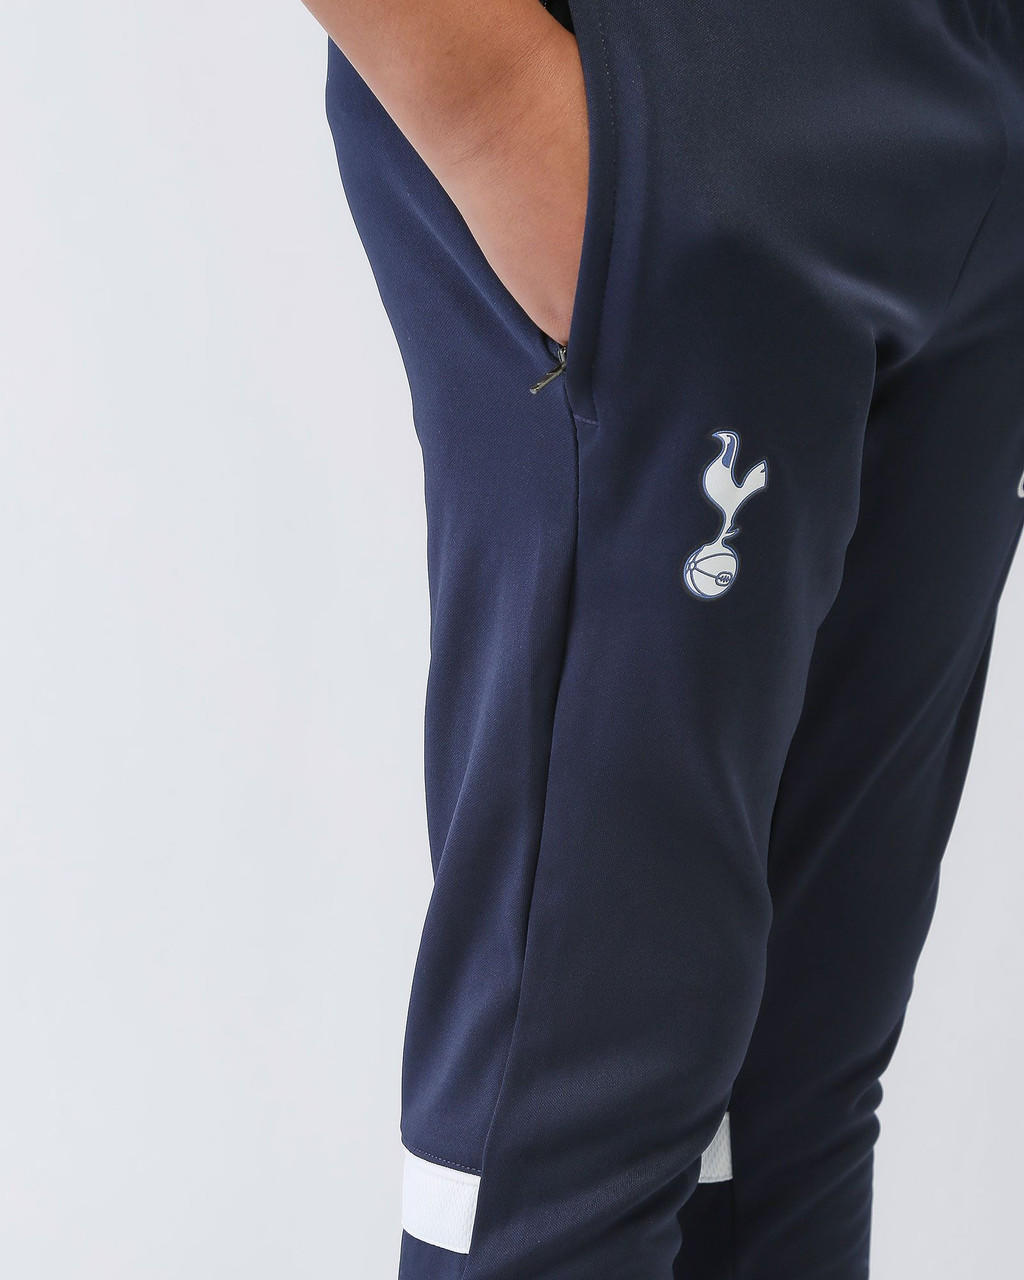 Spurs Nike Youth Navy Academy Pants XL - Spurs Shop Online